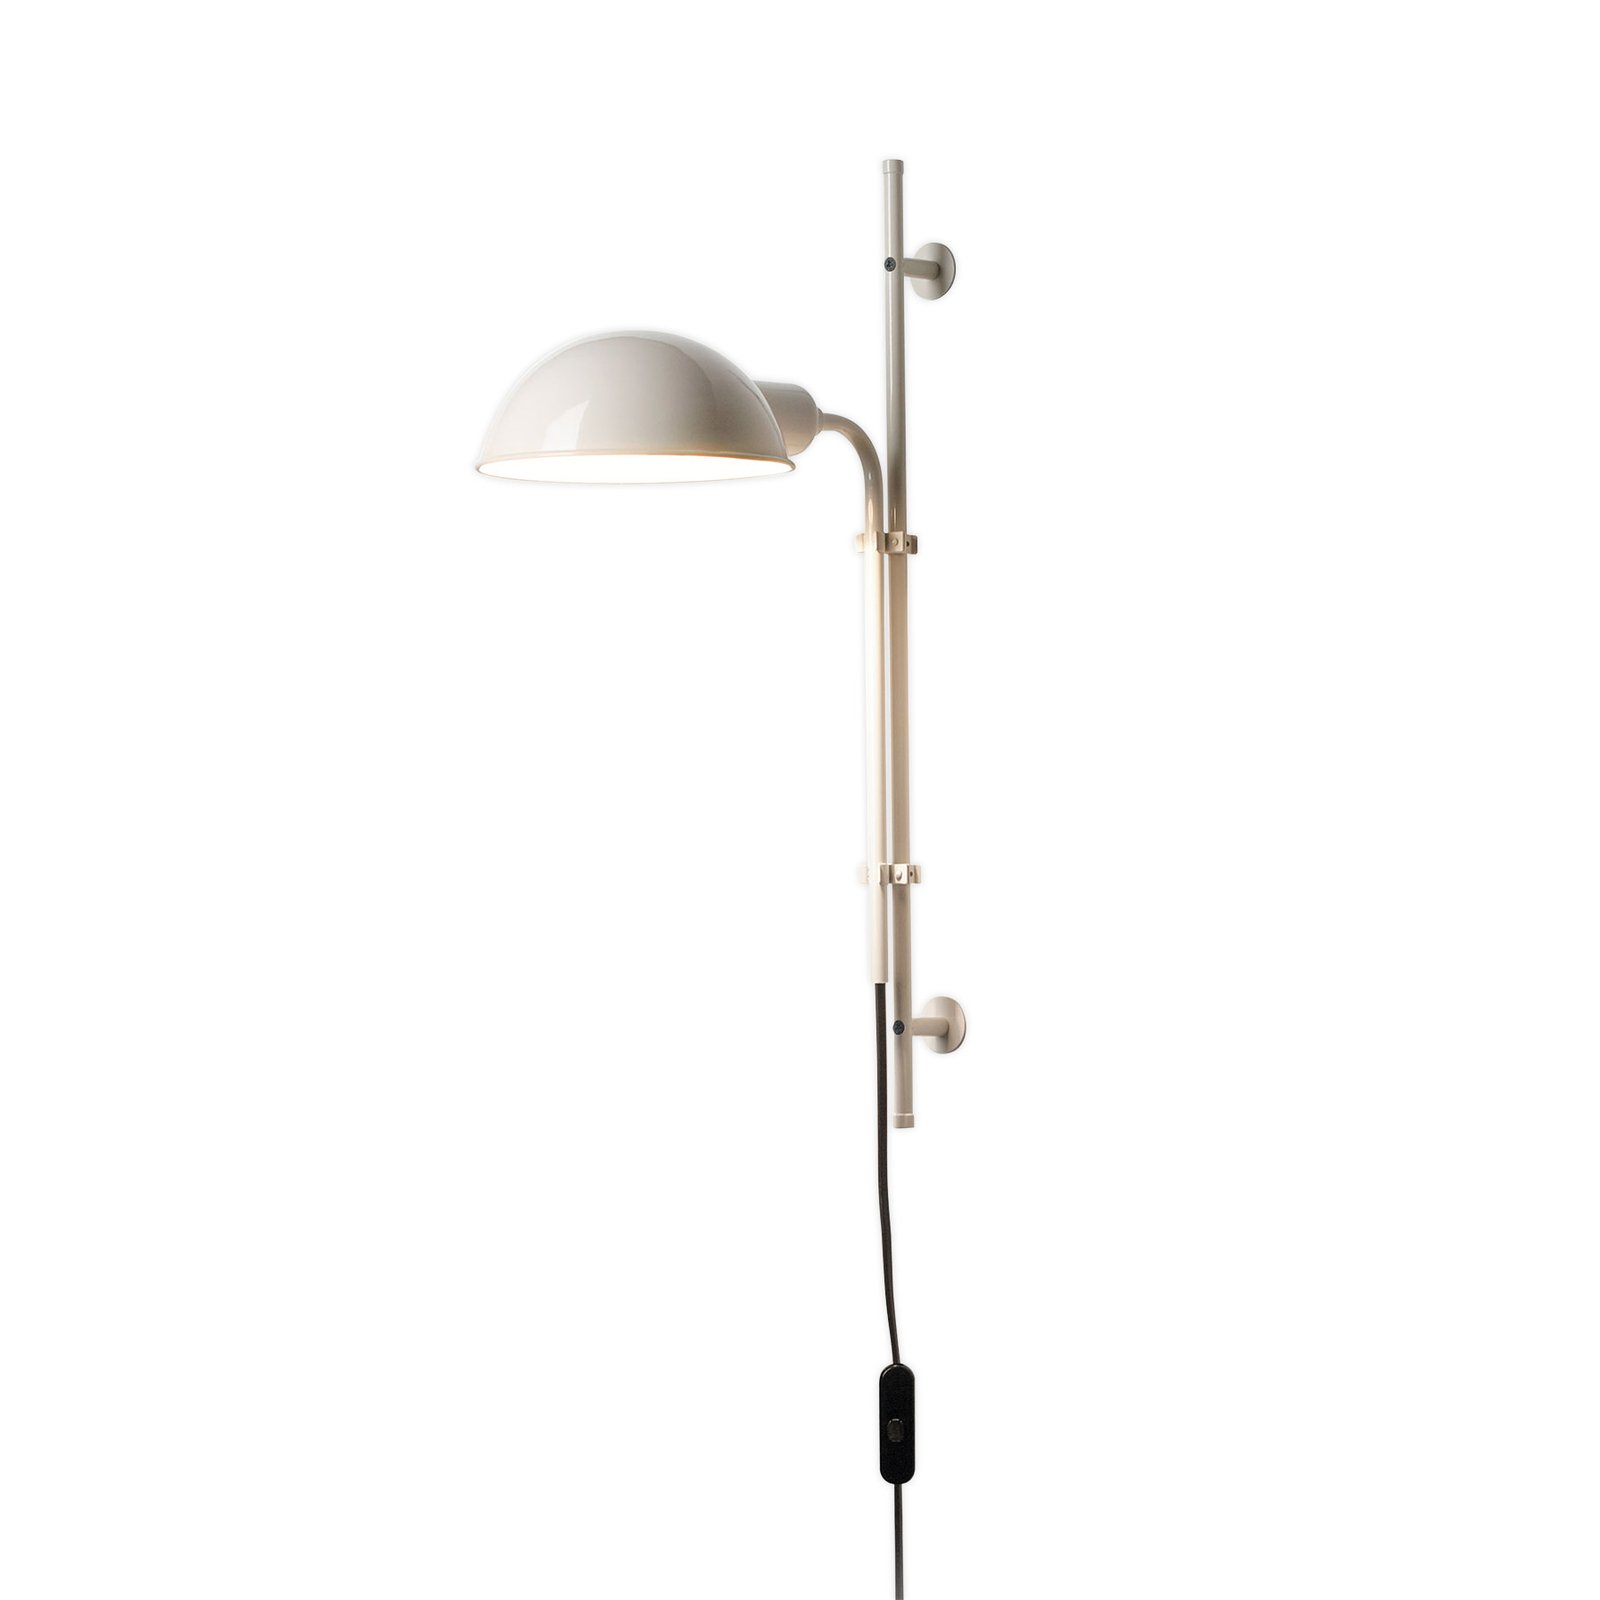 MARSET Funiculí A wall light, pearl white